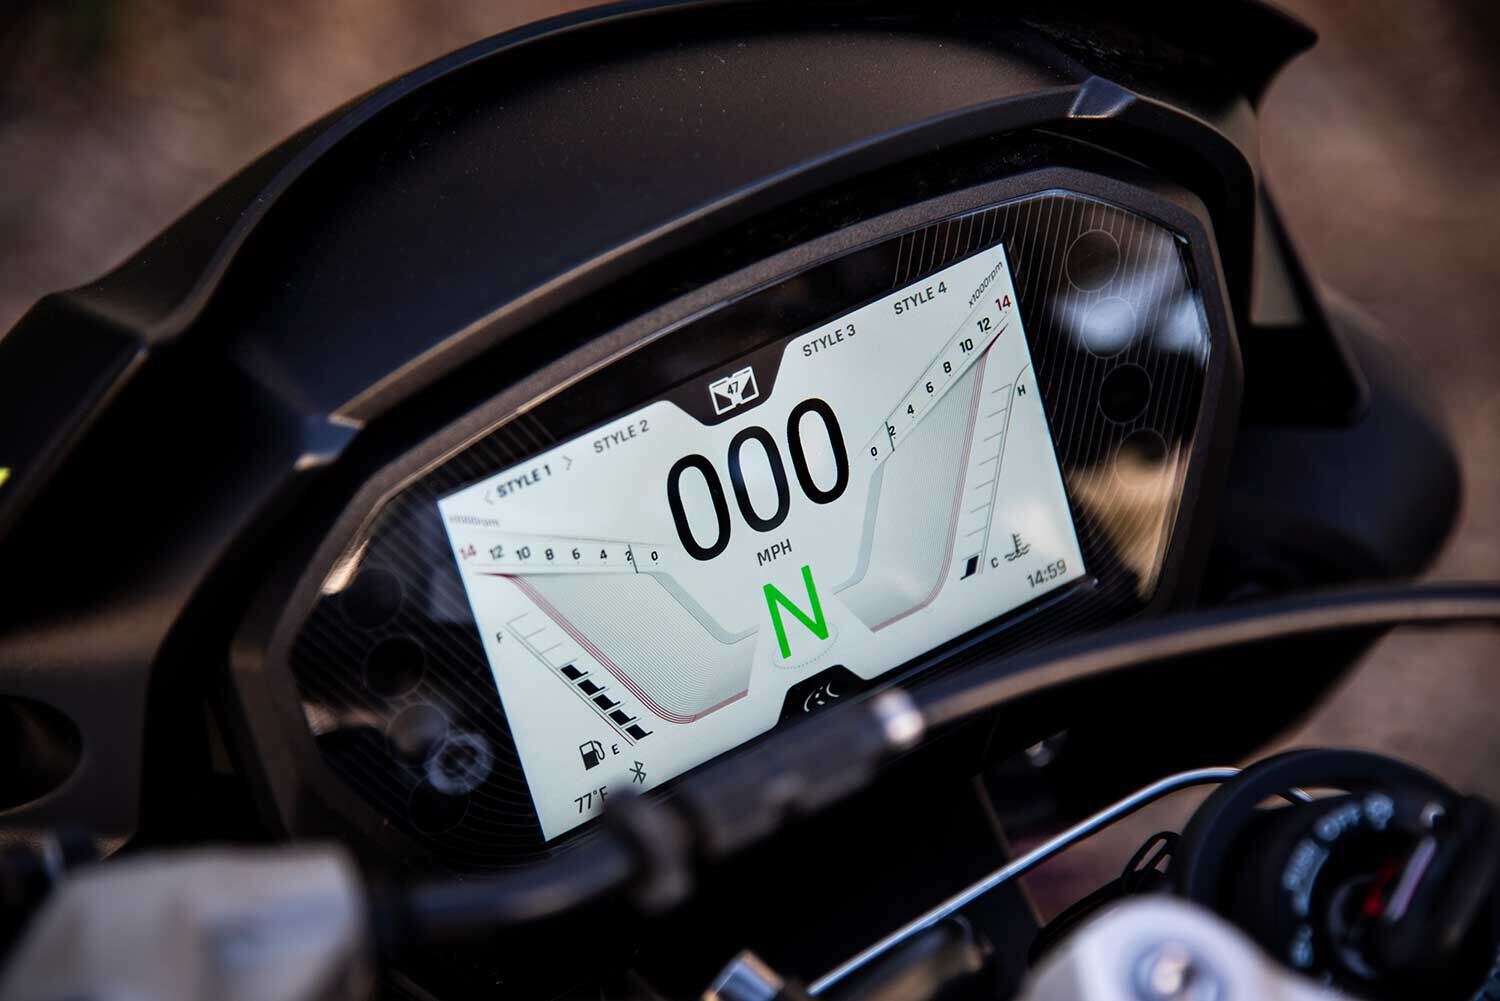 The Street Triple’s 5-inch TFT display screen offers a three-digit speedometer that begs for acceleration.